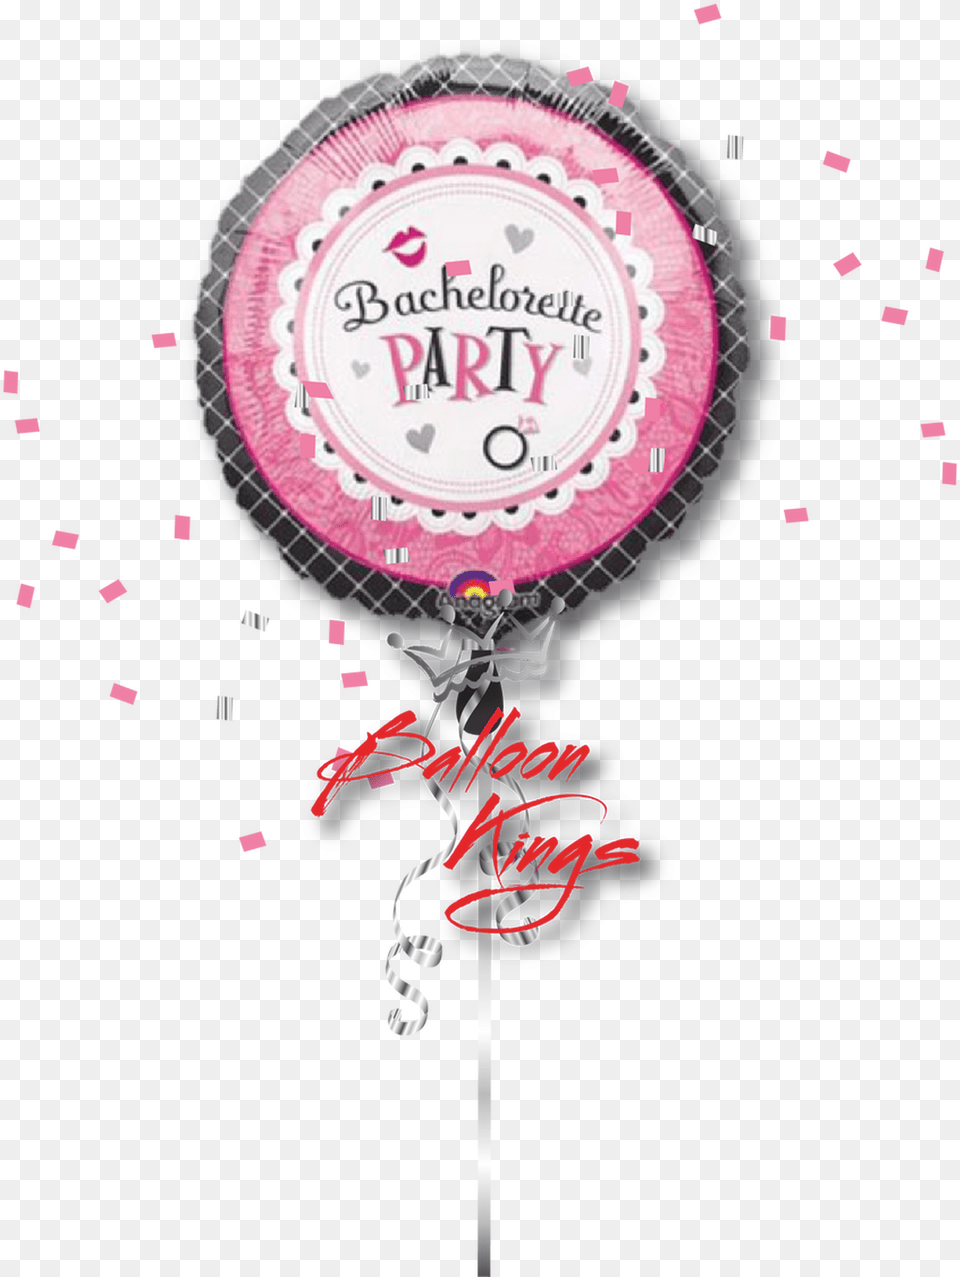 Bachelorette Party Balloon Balloon, Food, Sweets, Candy Png